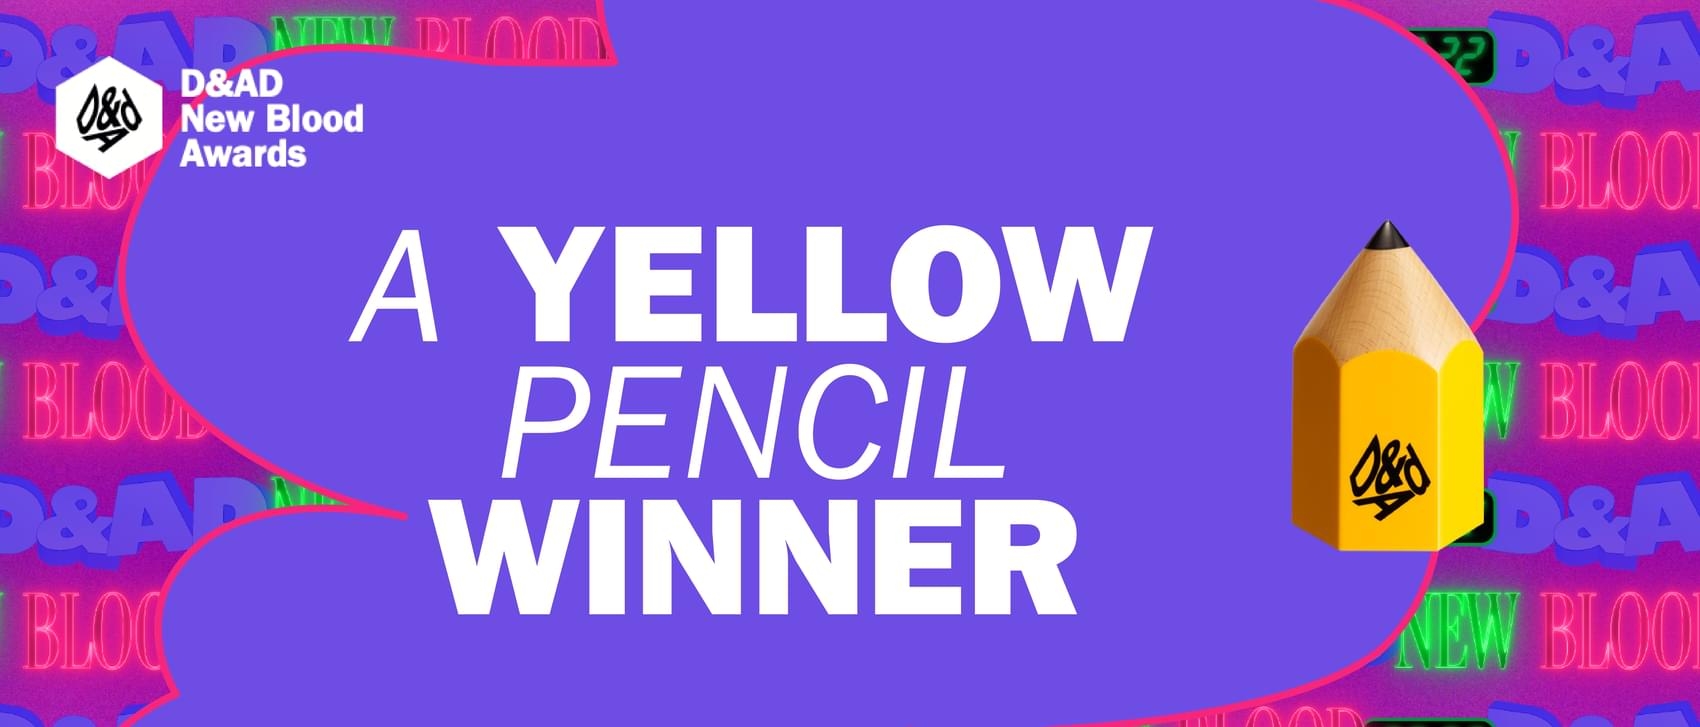 This entry won a yellow pencil in New Blood D&AD 2022